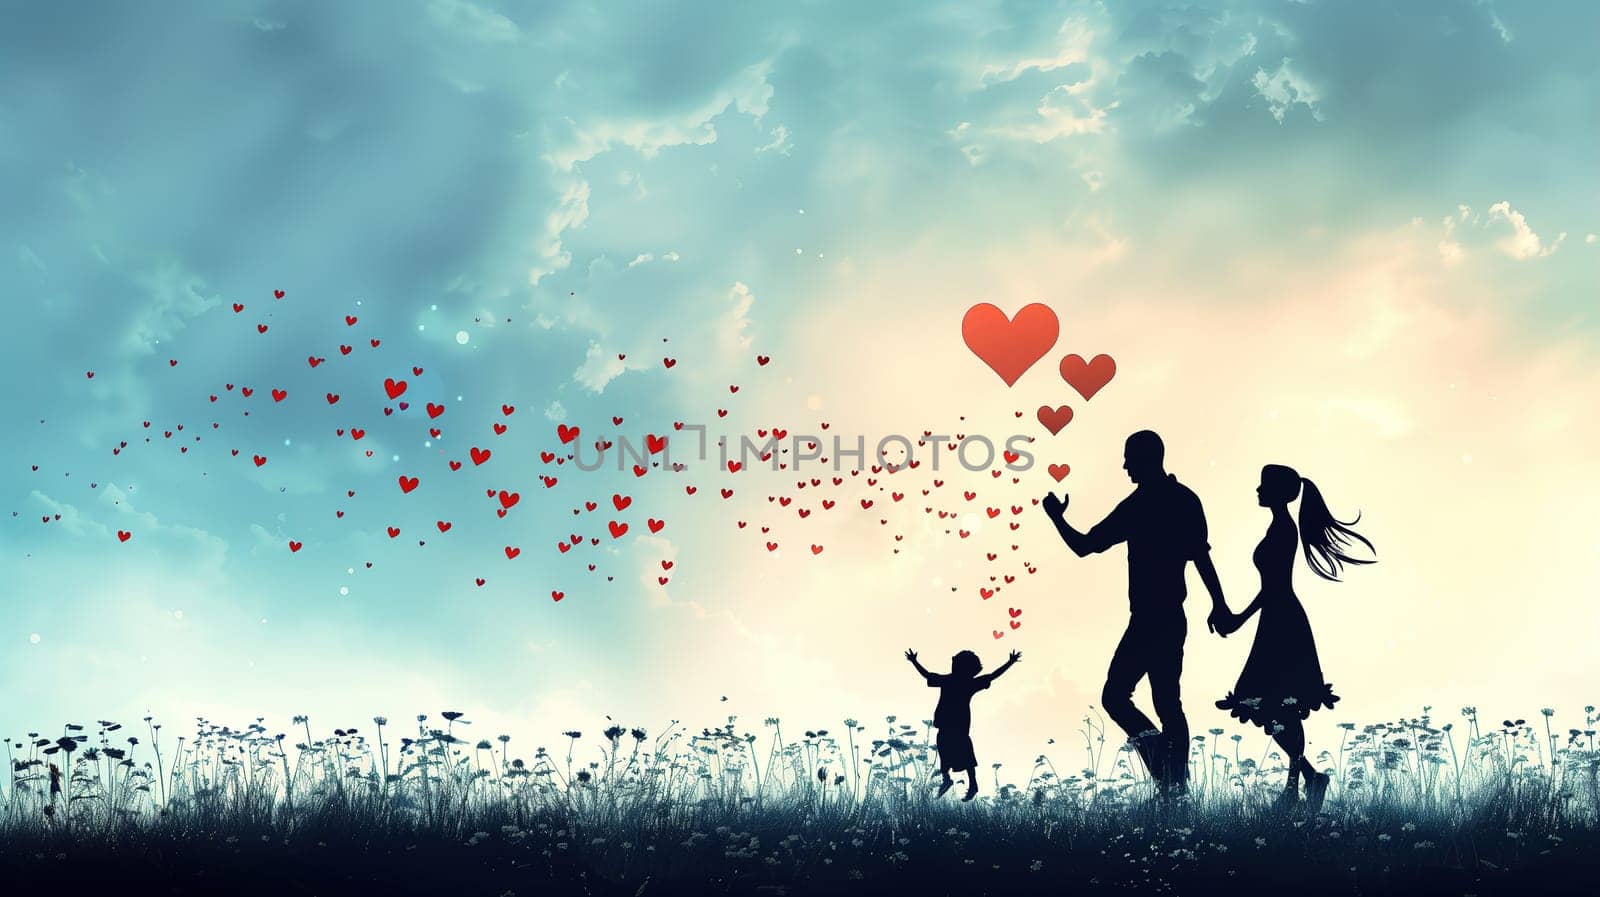 A silhouette of a man and a woman holding hands, surrounded by flying hearts. This image captures the essence of love and unity between two people on a special occasion.